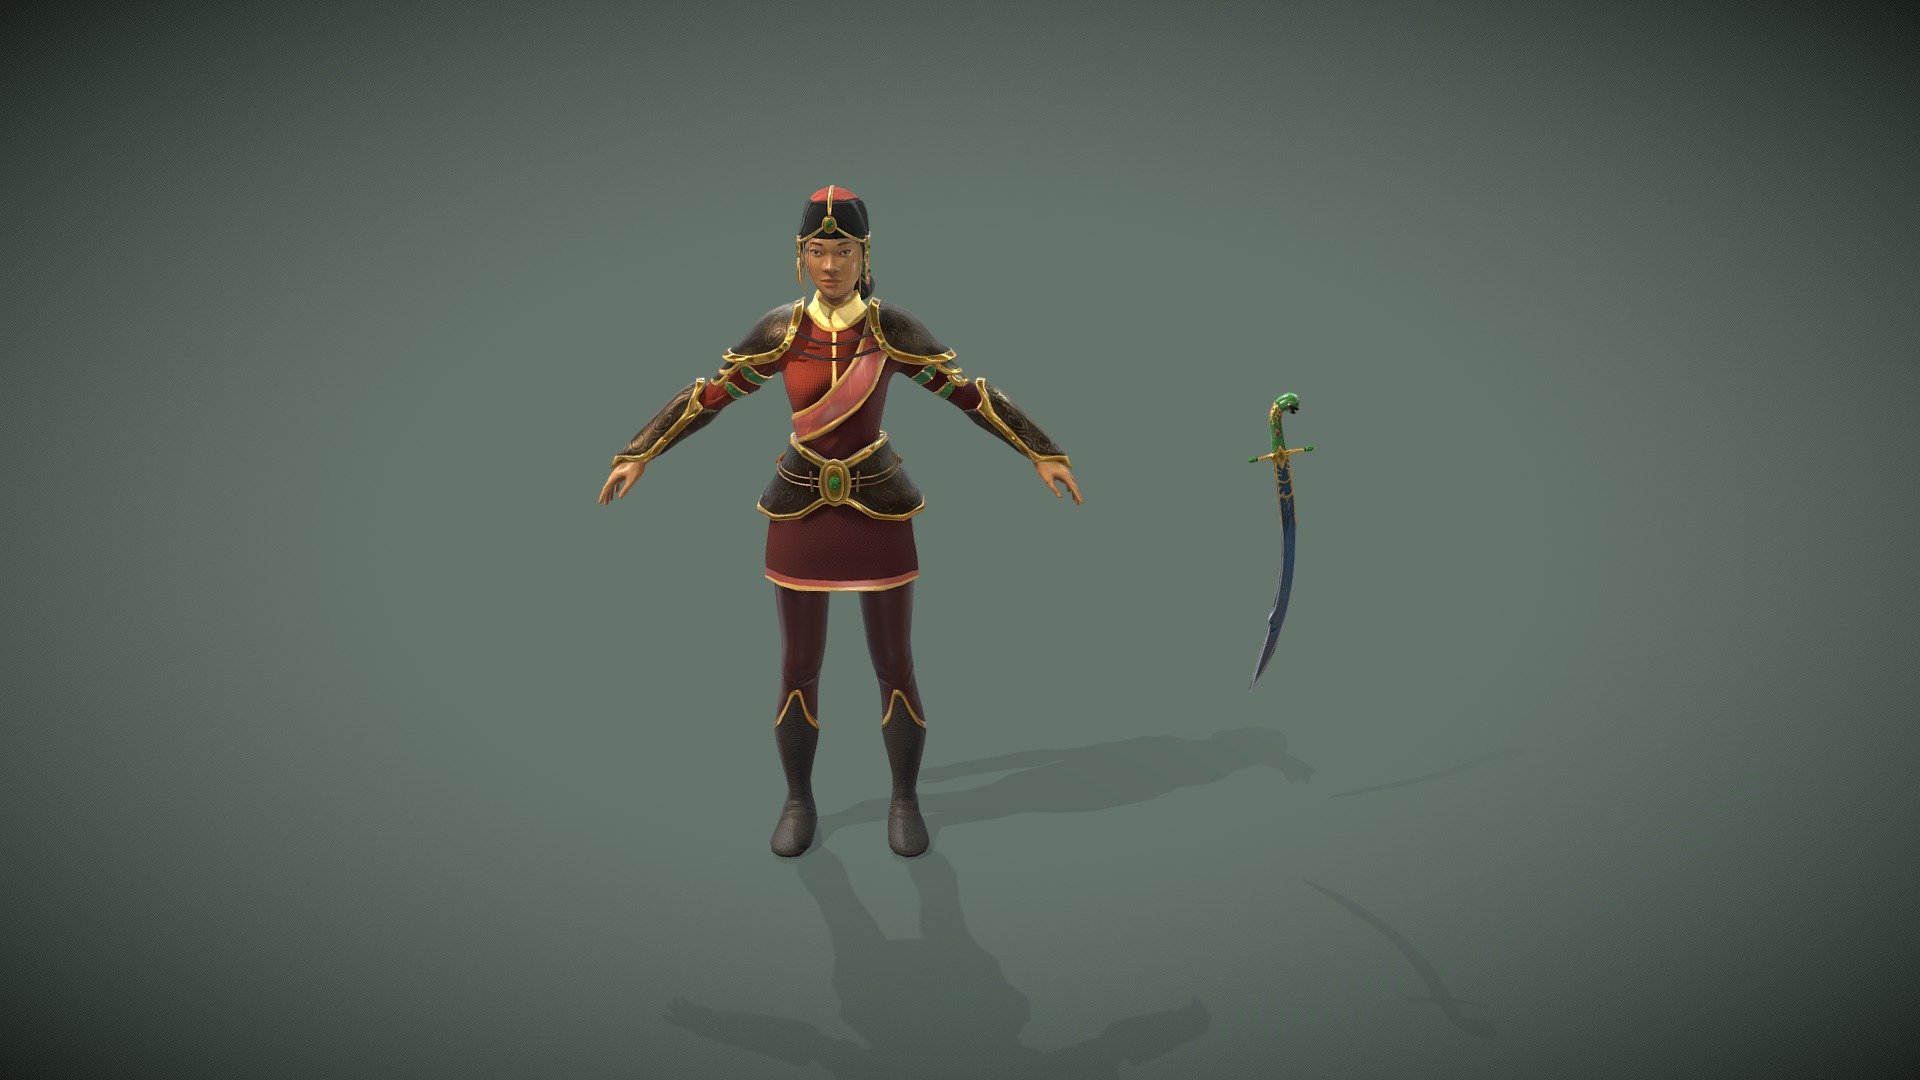 Hi everyone! :)

This is my very first 3D Character, a Mongolian royal guard.
Her name's Altantsetseg. Born in a nomad family, she learned quickly to use sabers thanks to his dad, who fought in numerous battles. At the age of 18, she entered to serve the Emperor, who created the first Royal Army from the Yuan Dynasty.
Determined and intelligent, she's become the first woman to receive the title of Major of the Yuan's Royal Army.

High Poly: ZBrush
Retopology: Maya
Texturing: Substance Painter
Rig, Skin and Animation: Maya
Integrated into UE4.

PORTFOLIO: https://www.artstation.com/artwork/mD15av - Mongolian Royal Guard - 3D model by Nekoyukki 3d model